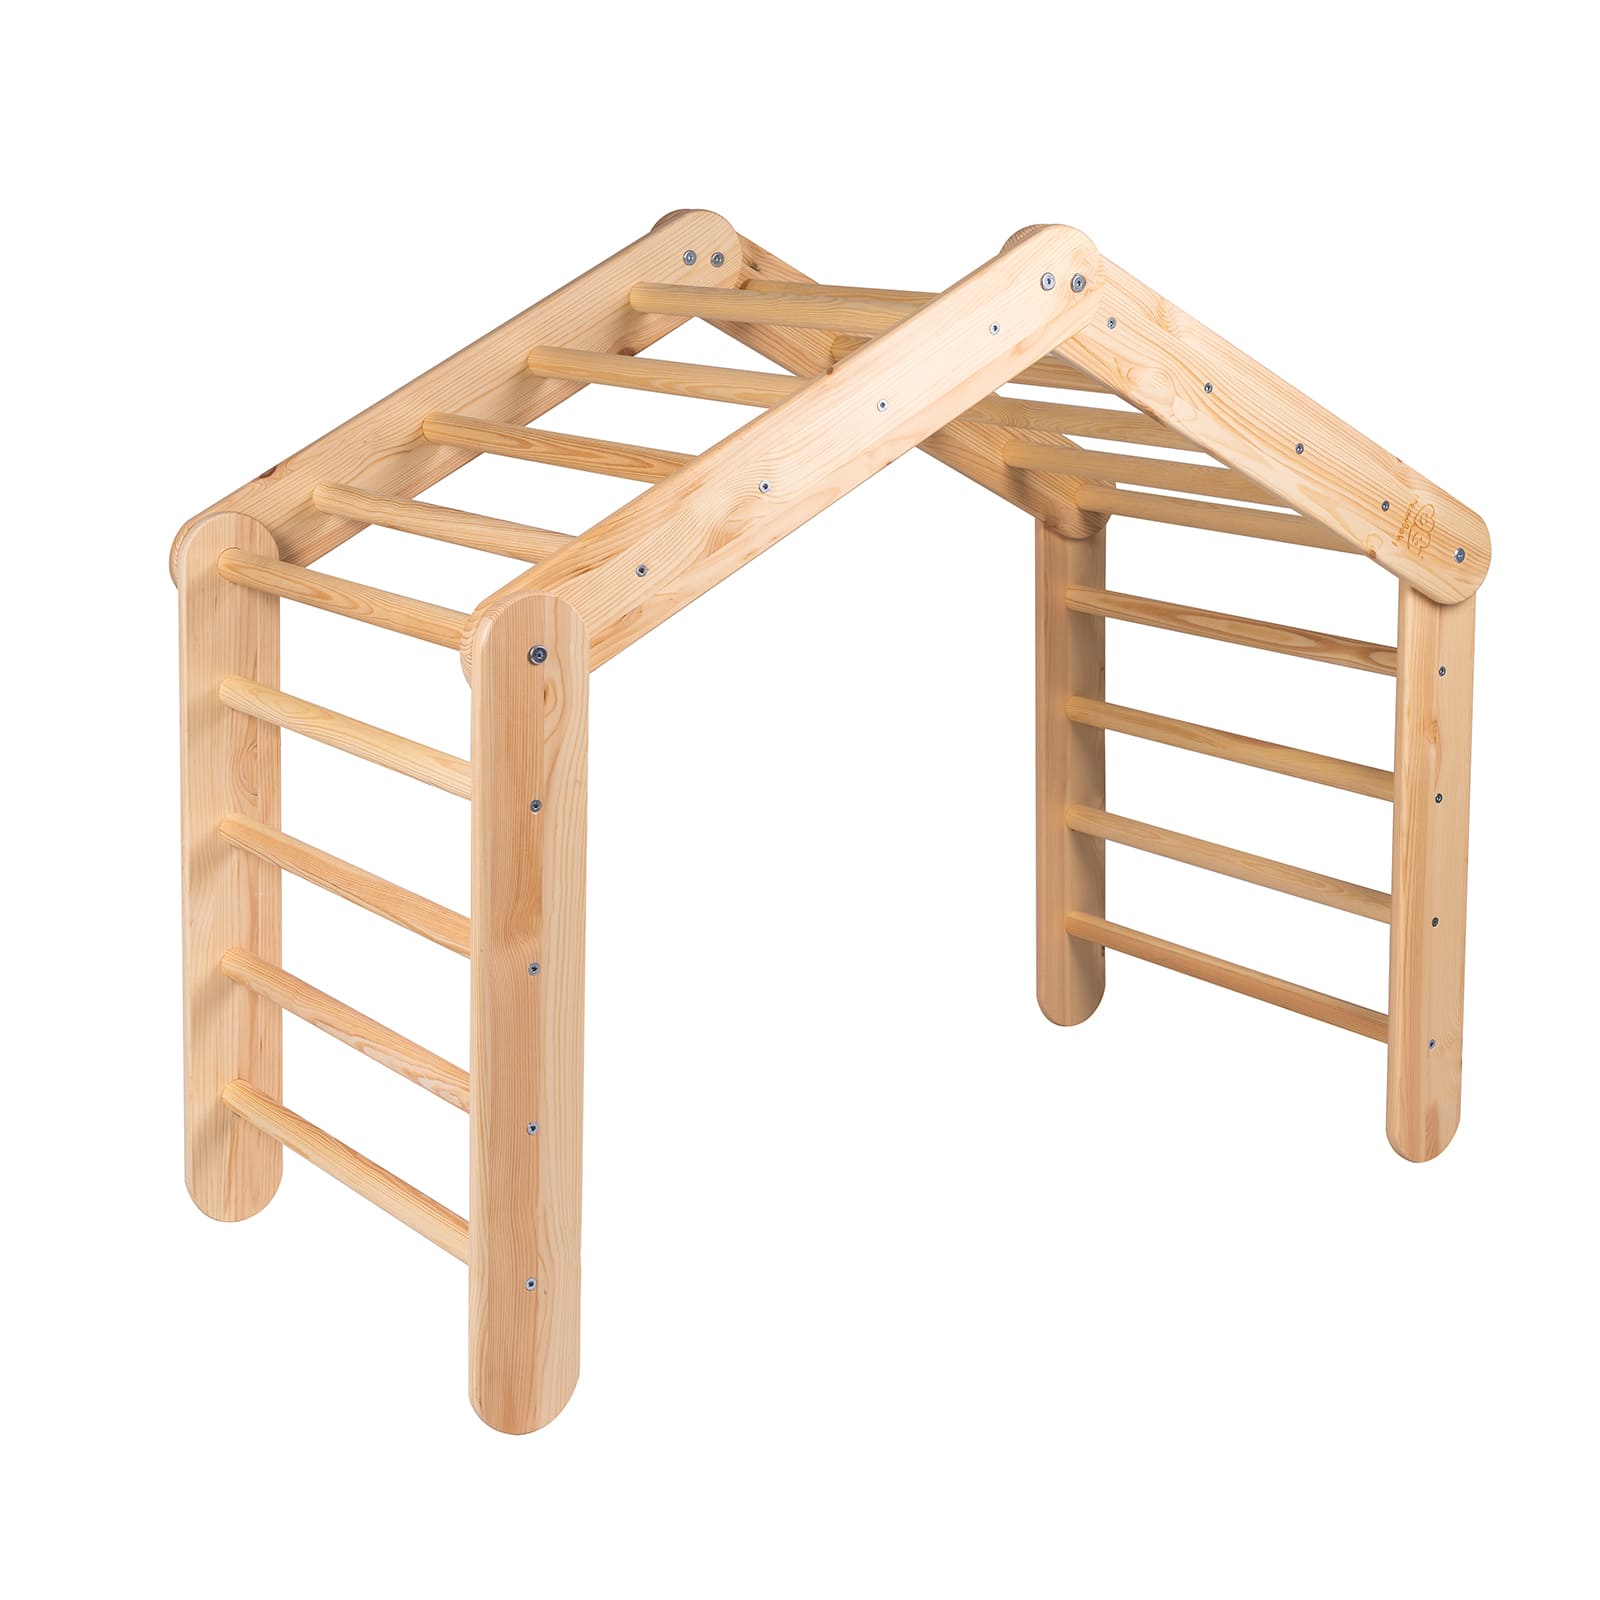 Folding Large Play House With Ladder For Kids By MeowBaby - Stylemykid.com